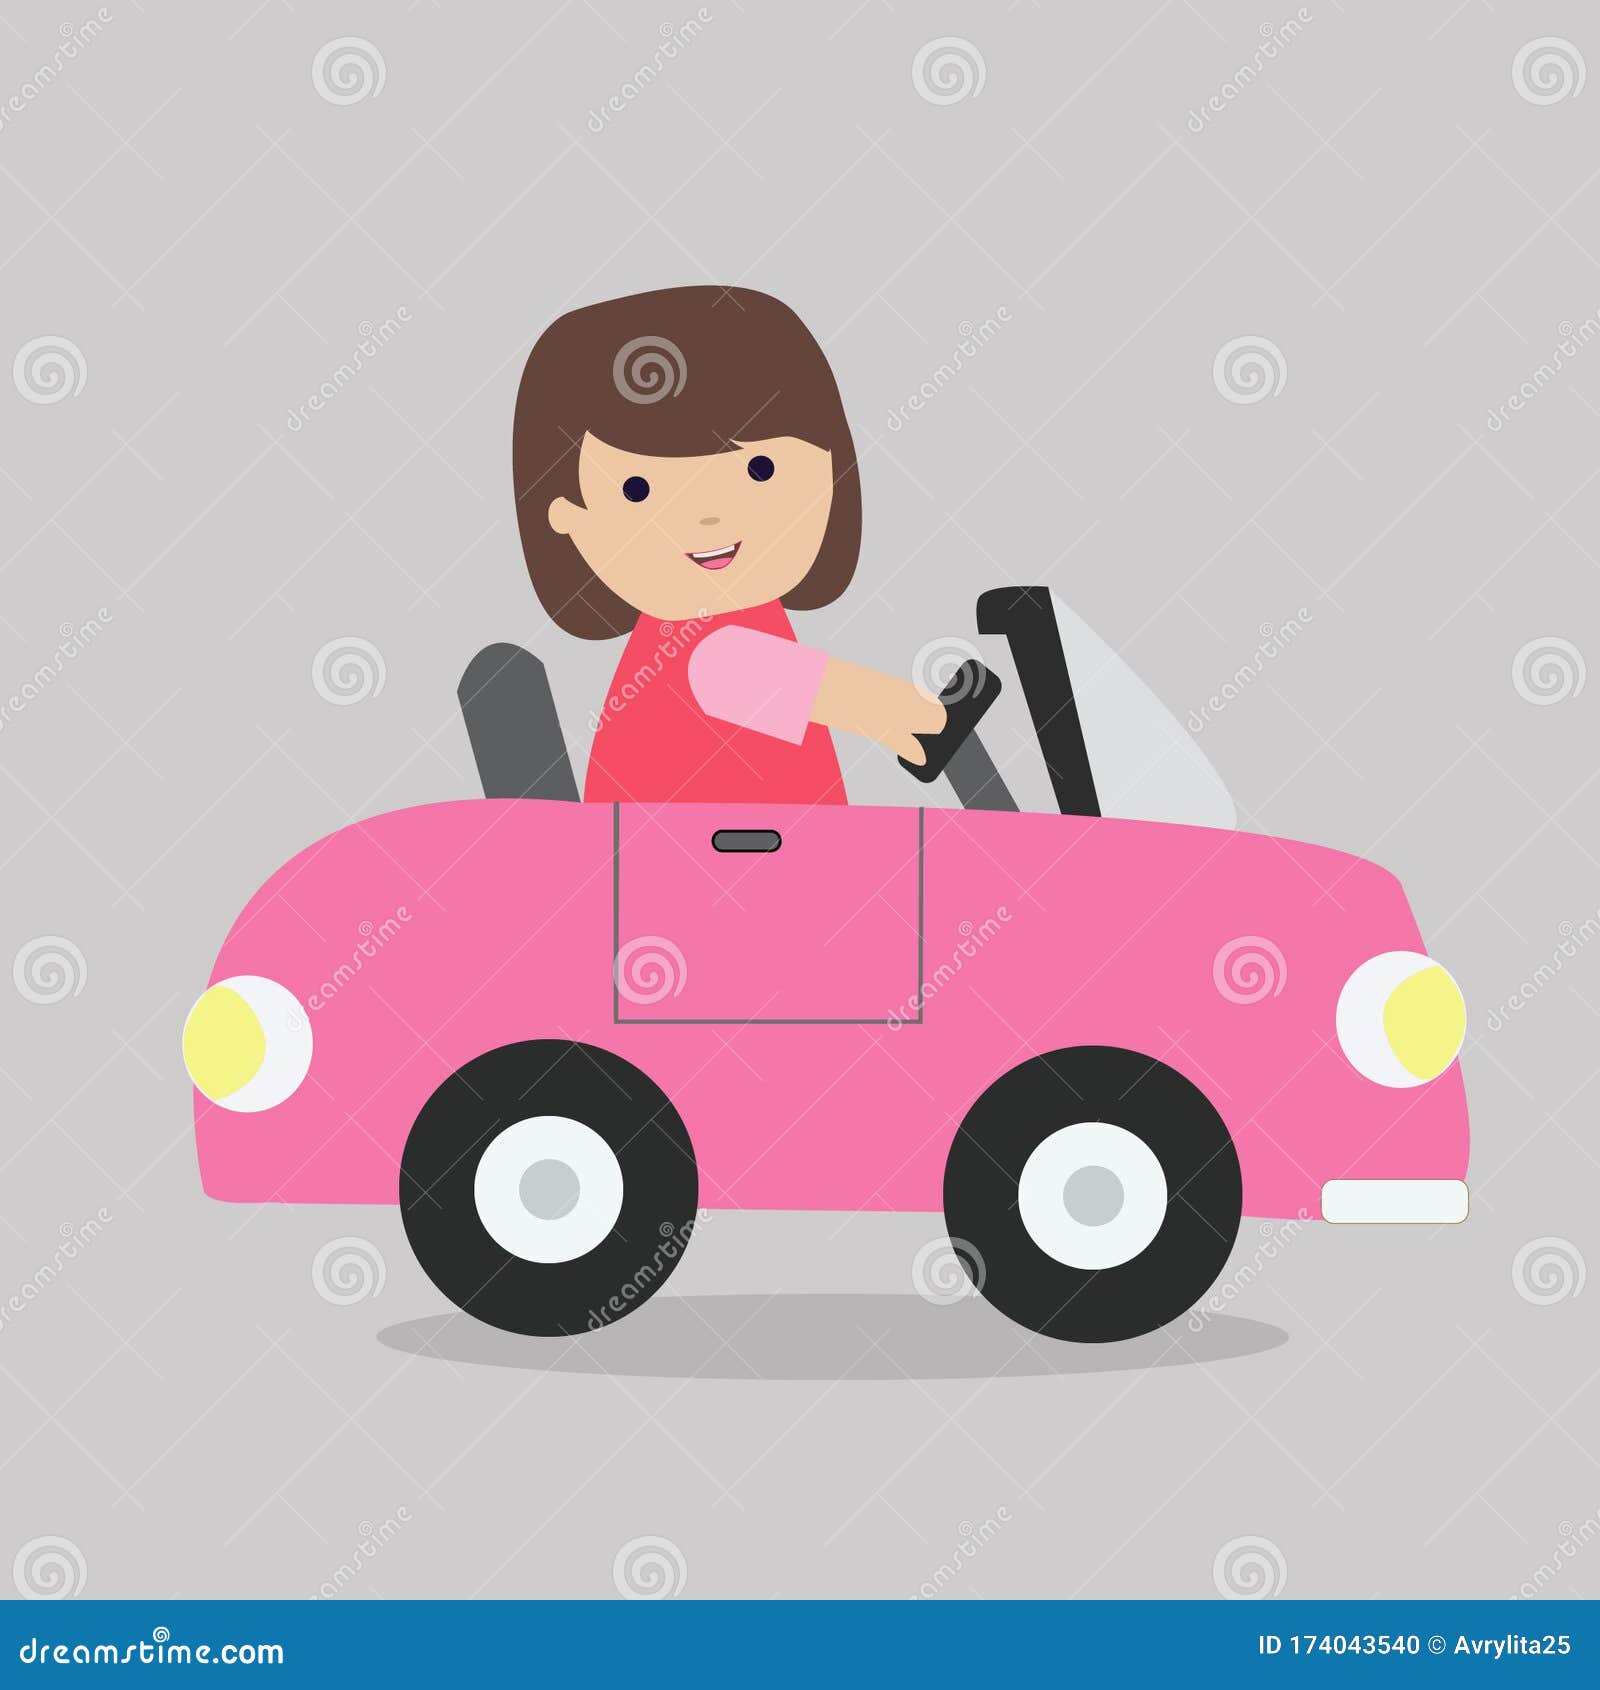 Cute Cartoon Girl Driving a Car Stock Vector - Illustration of isolated,  people: 174043540